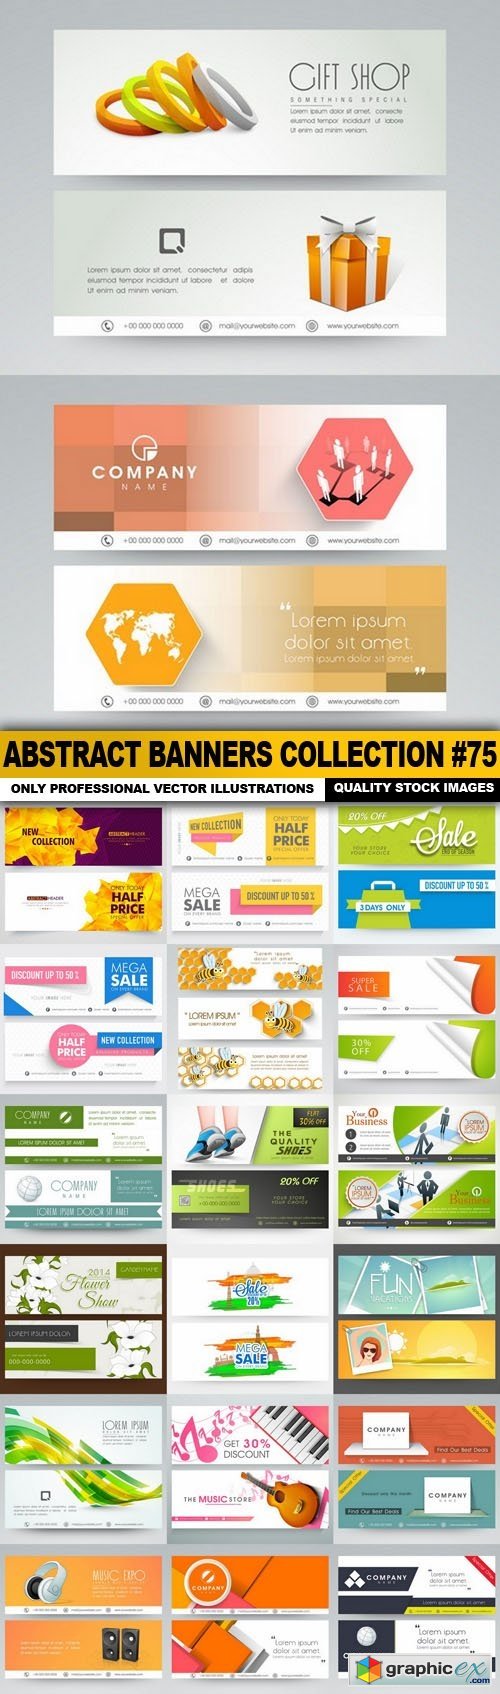 Abstract Banners Collection #75